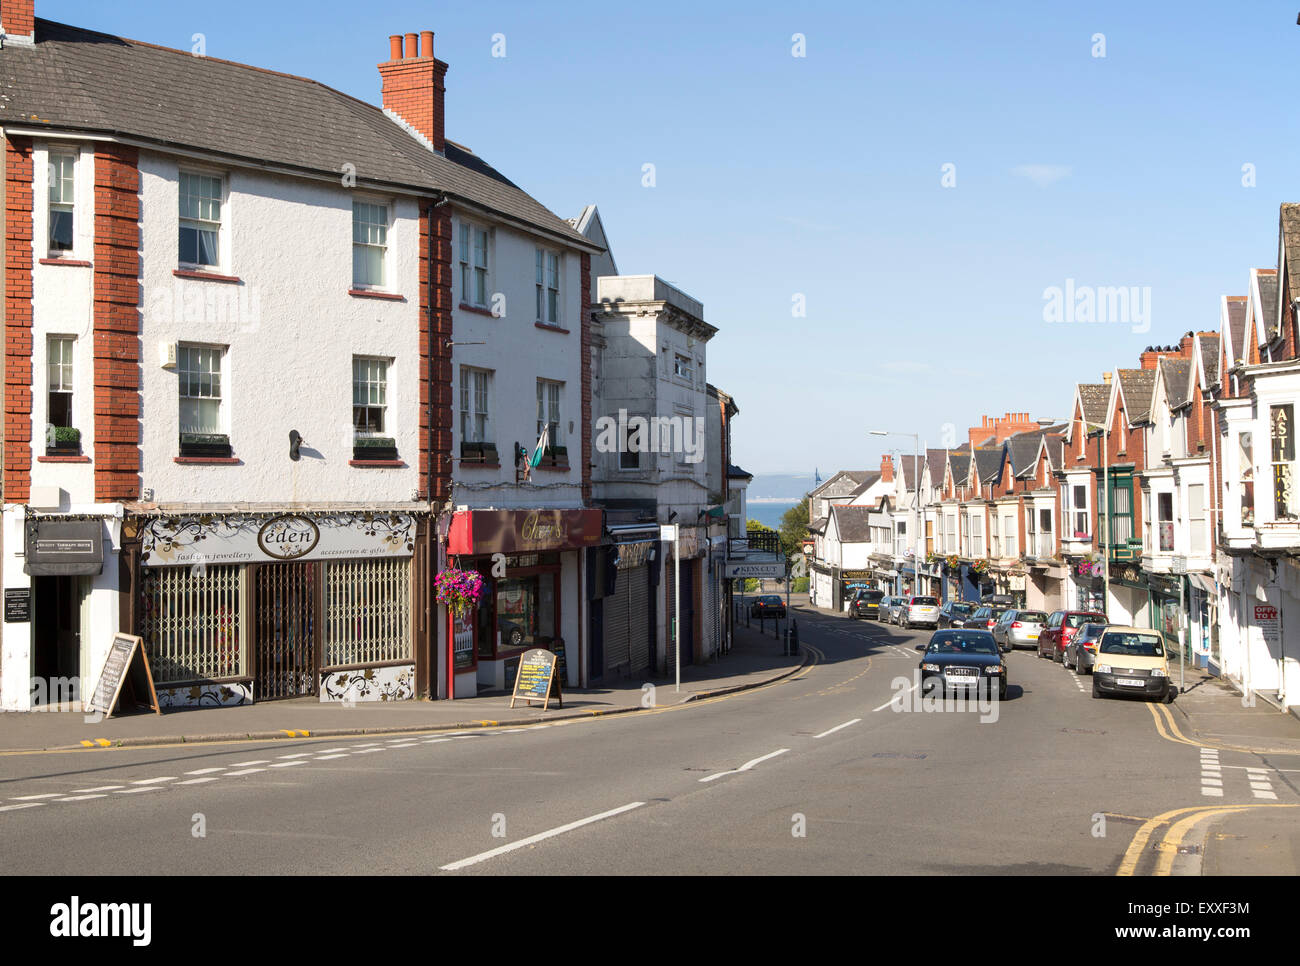 Main shopping street in Oystermouth, Mumbles, Gower peninsula, near Swansea, South Wales, UK Stock Photo